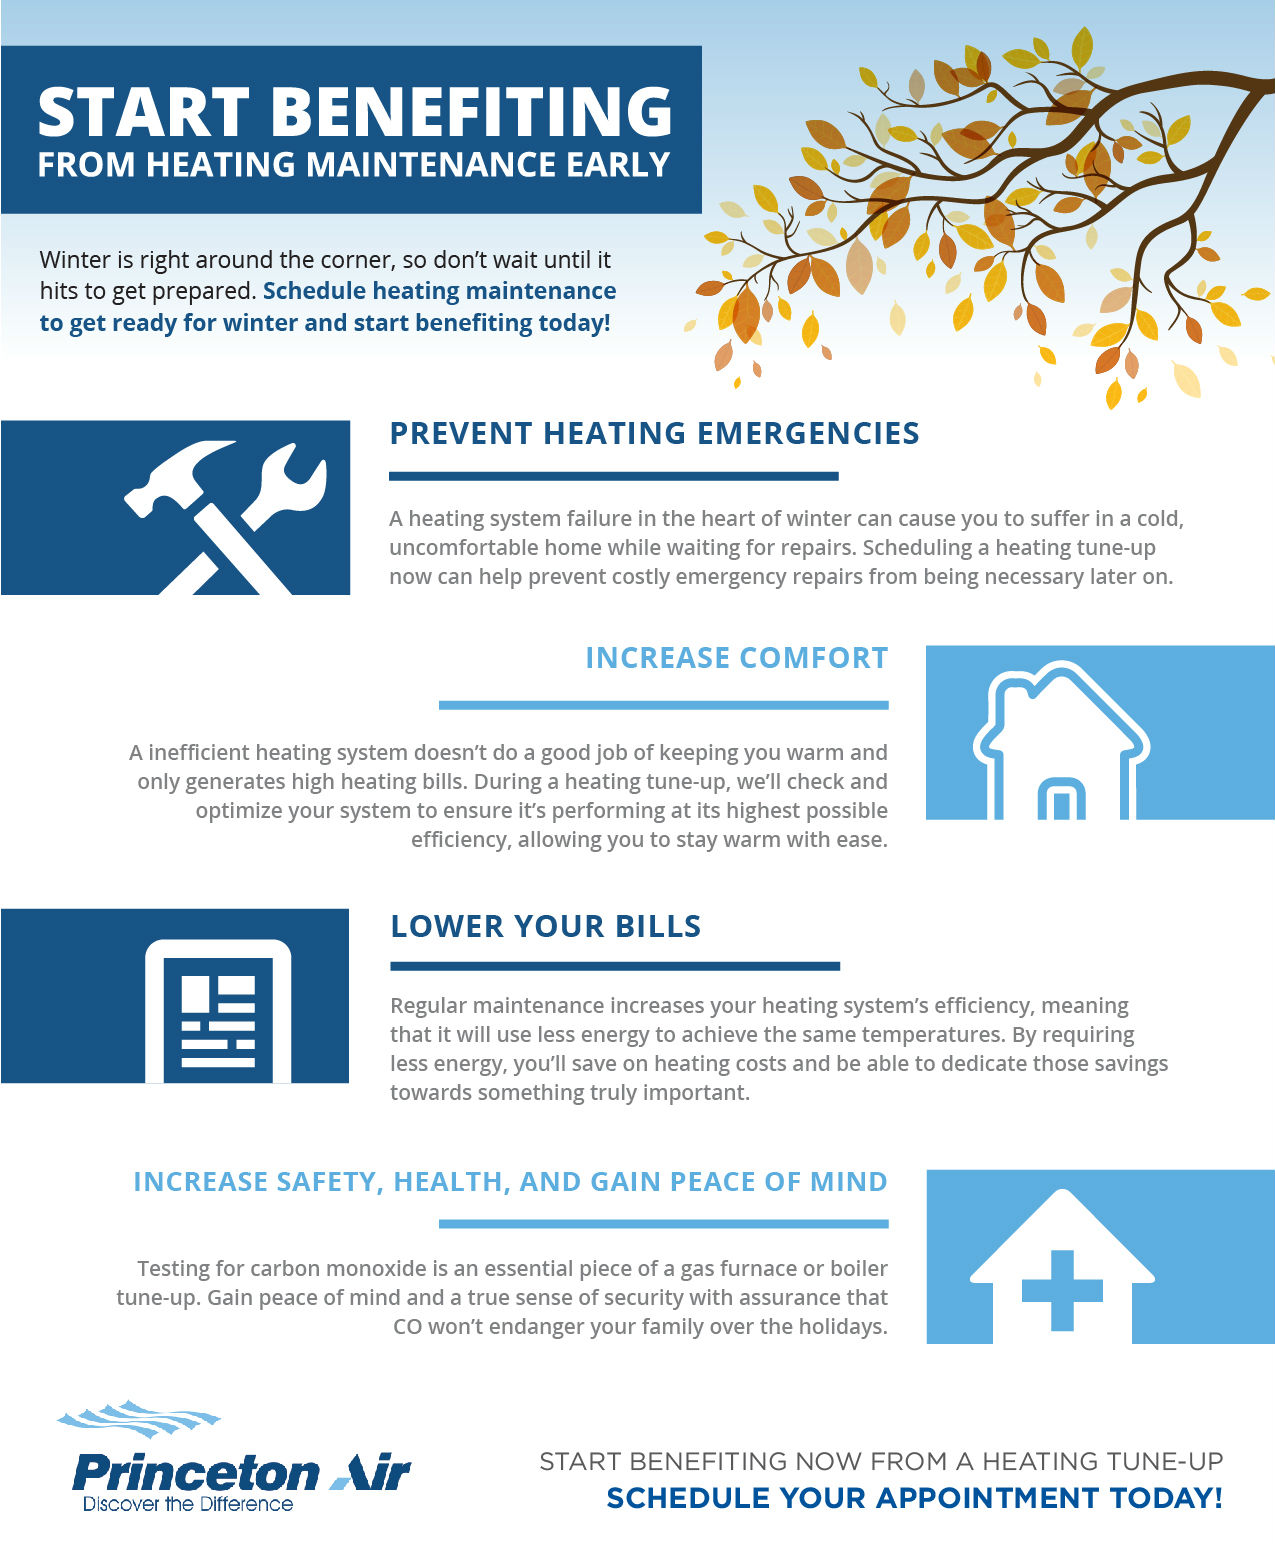 Start Benefiting from Heating Maintenance Early with Princeton Air Infographic